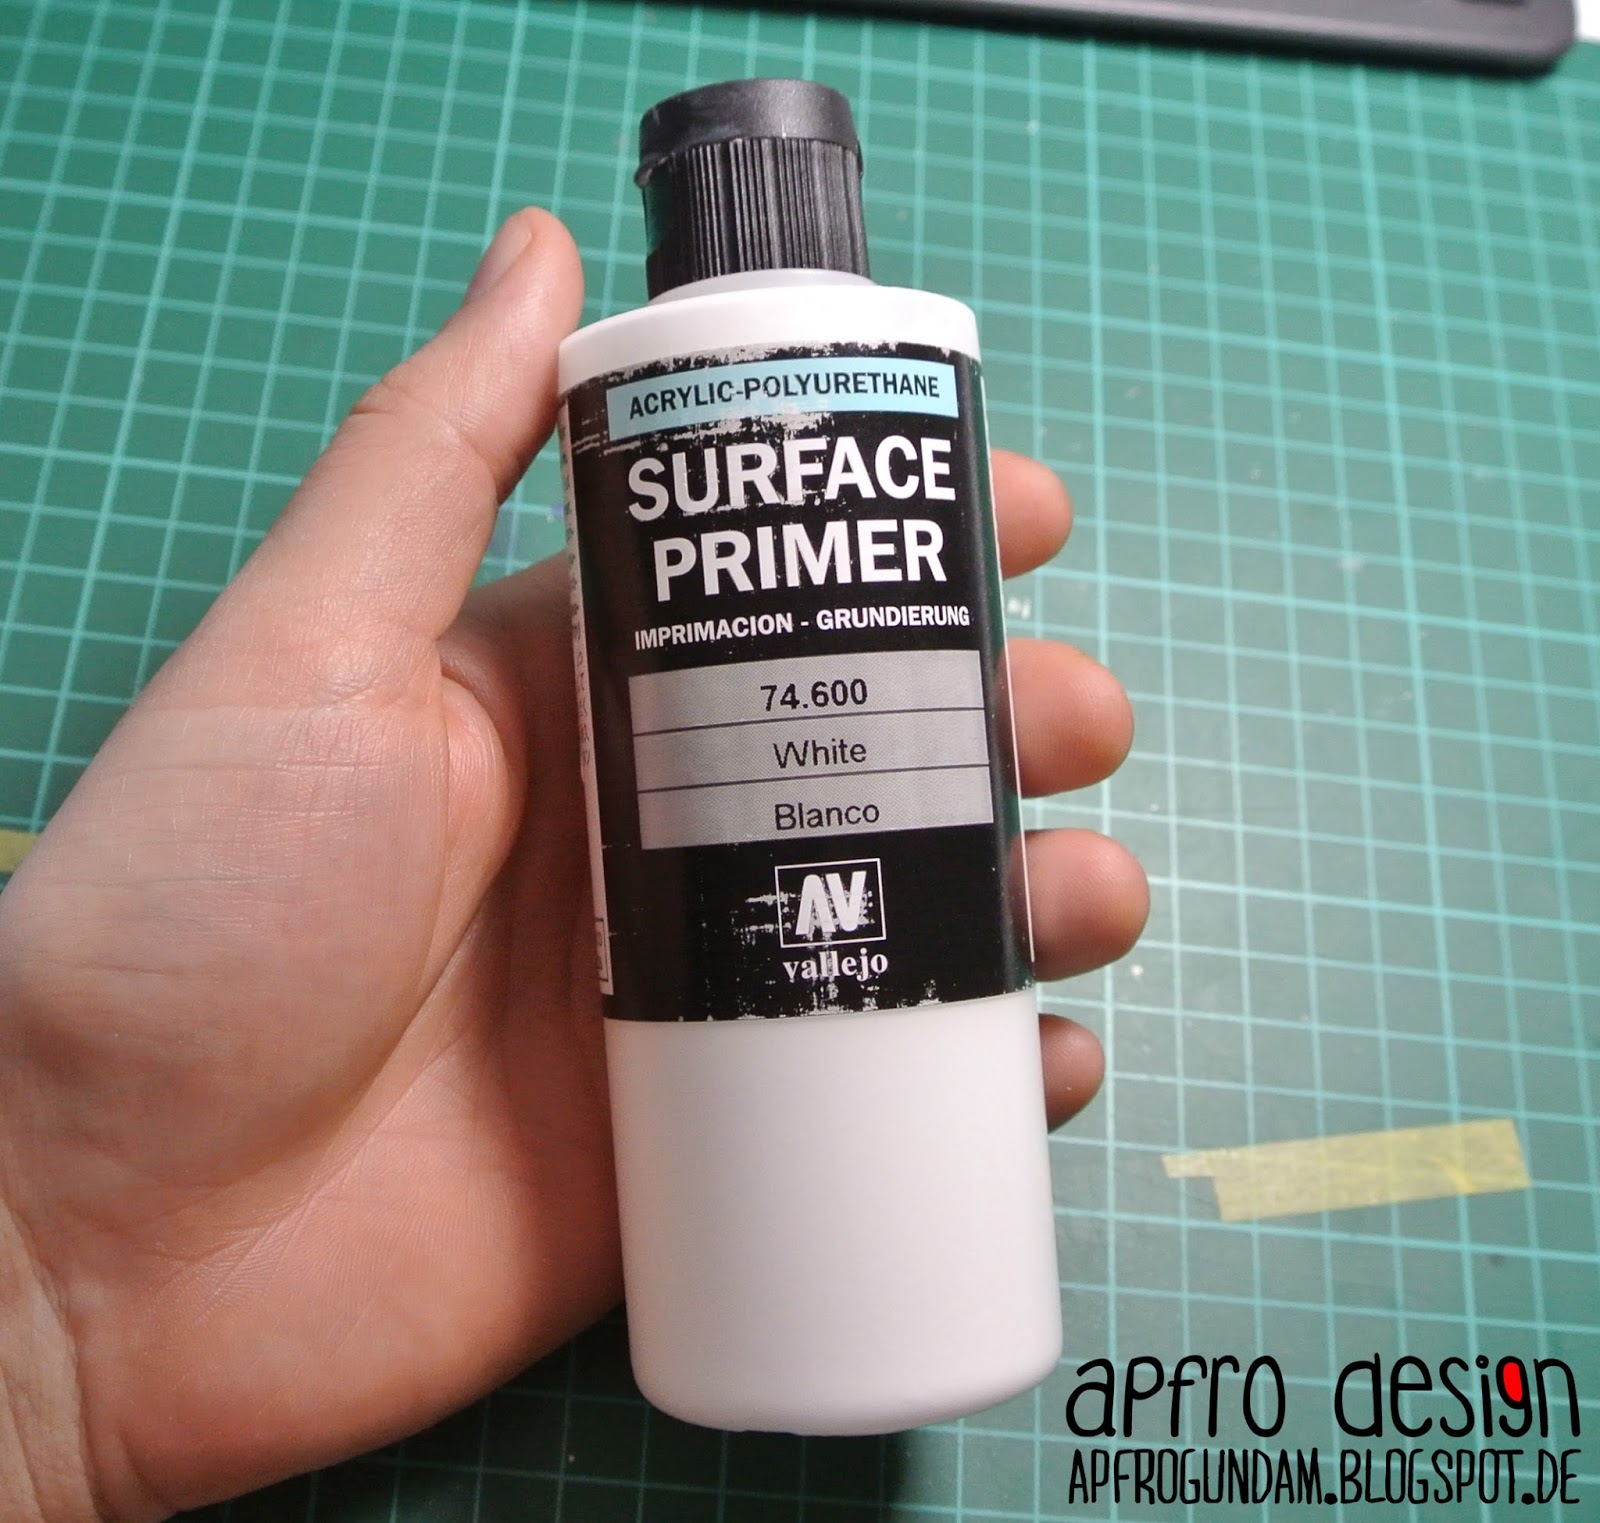 How to use Vallejo Primers 